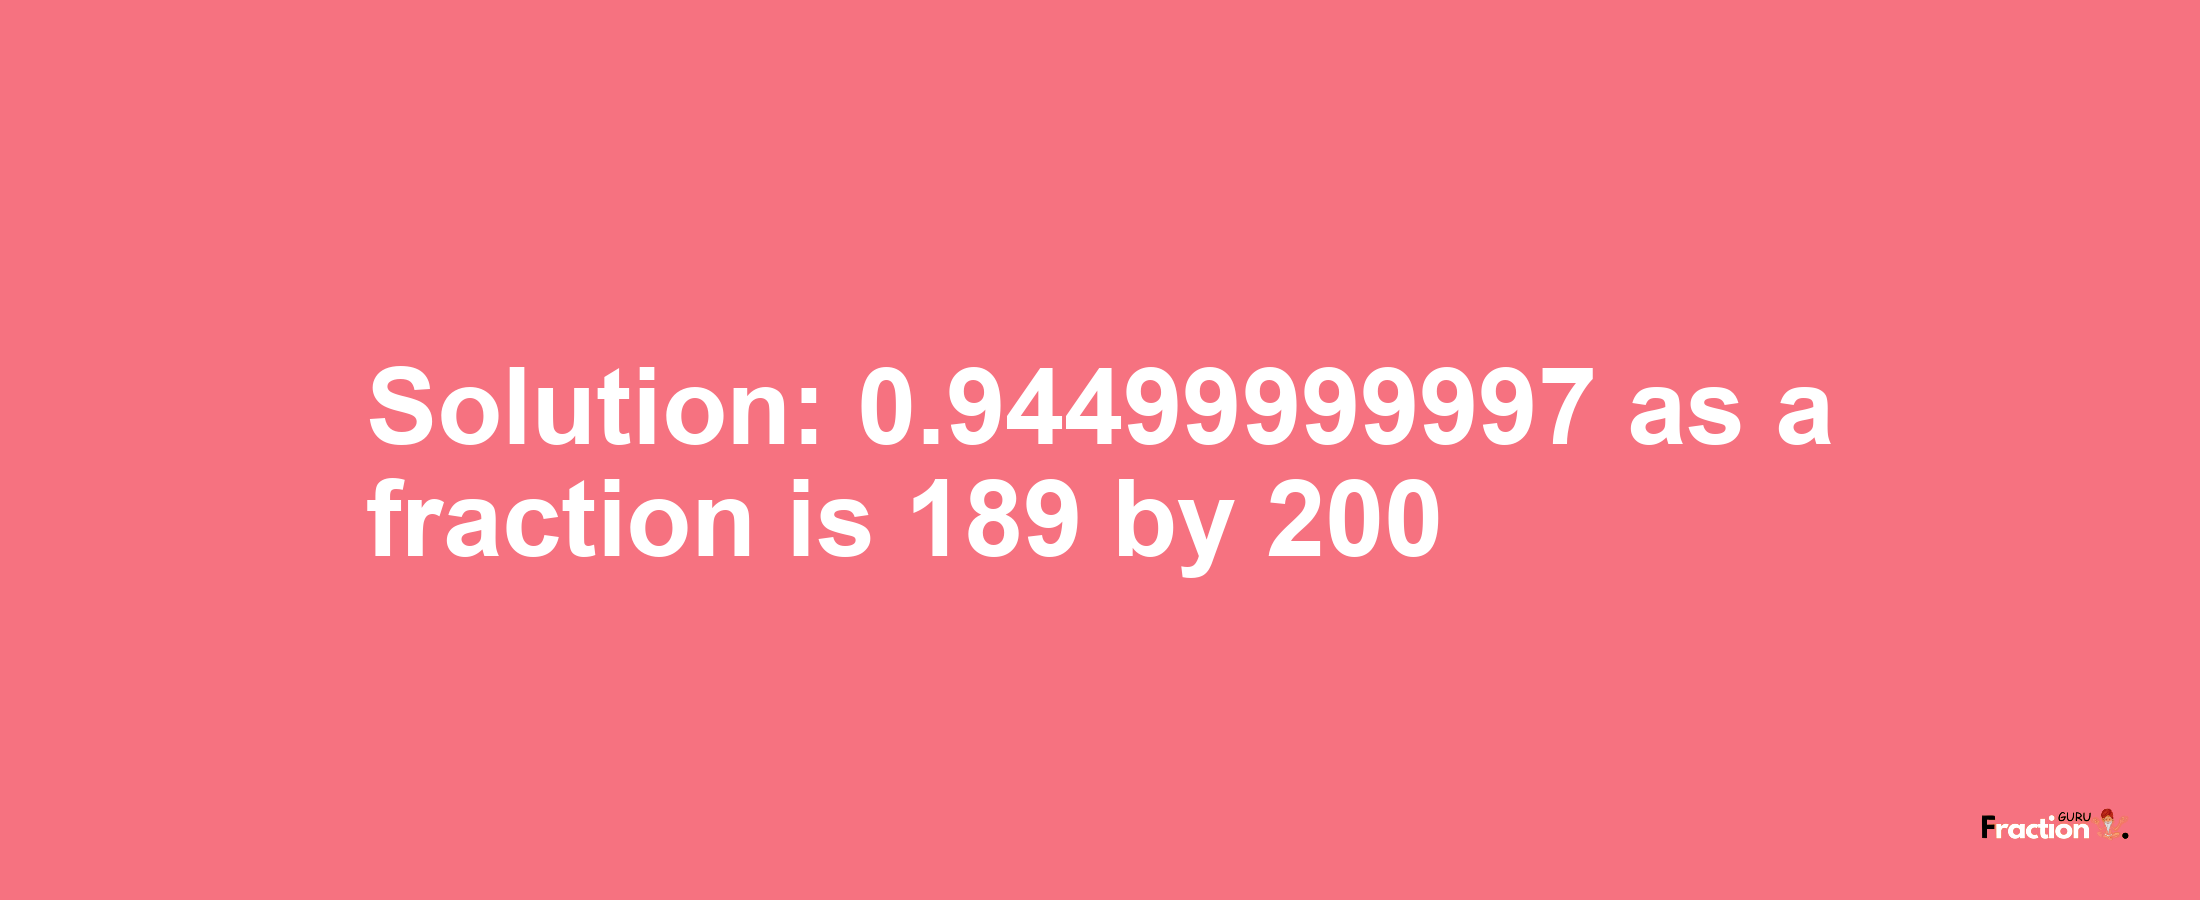 Solution:0.94499999997 as a fraction is 189/200